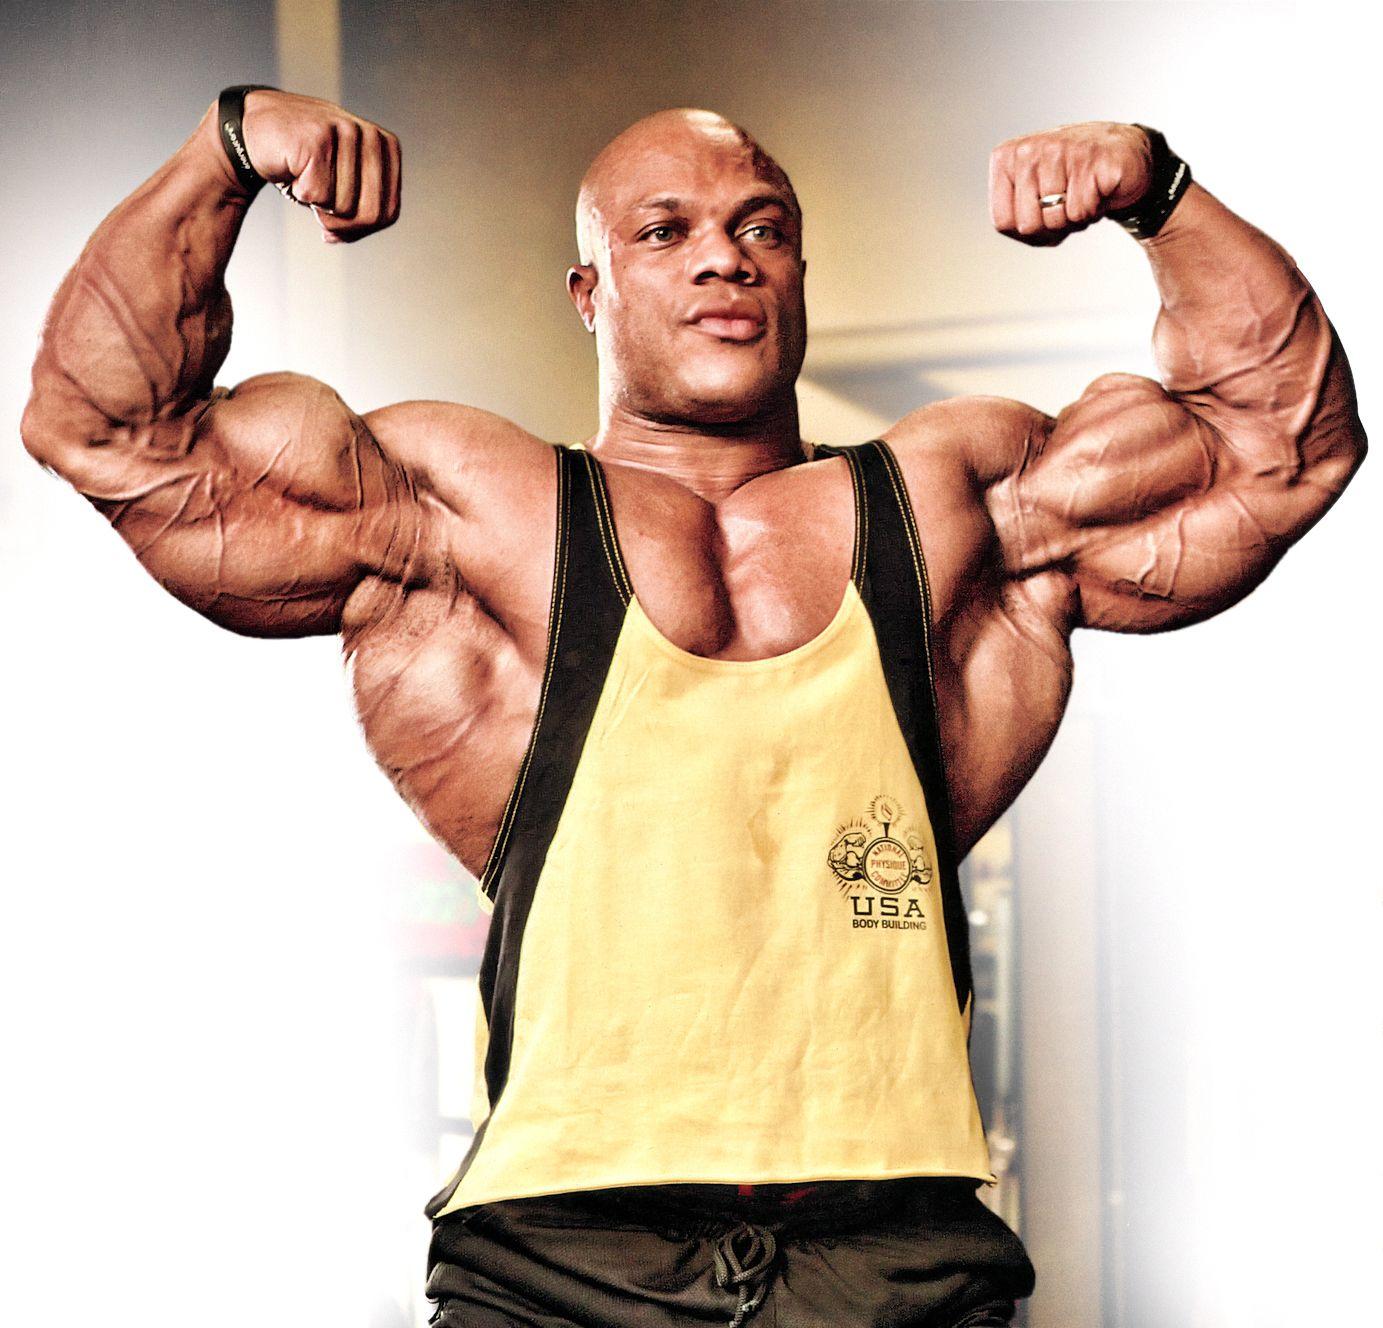 Phil Heath mr Olympia, HD Wallpapers 2013 ~ All About HD Wallpapers